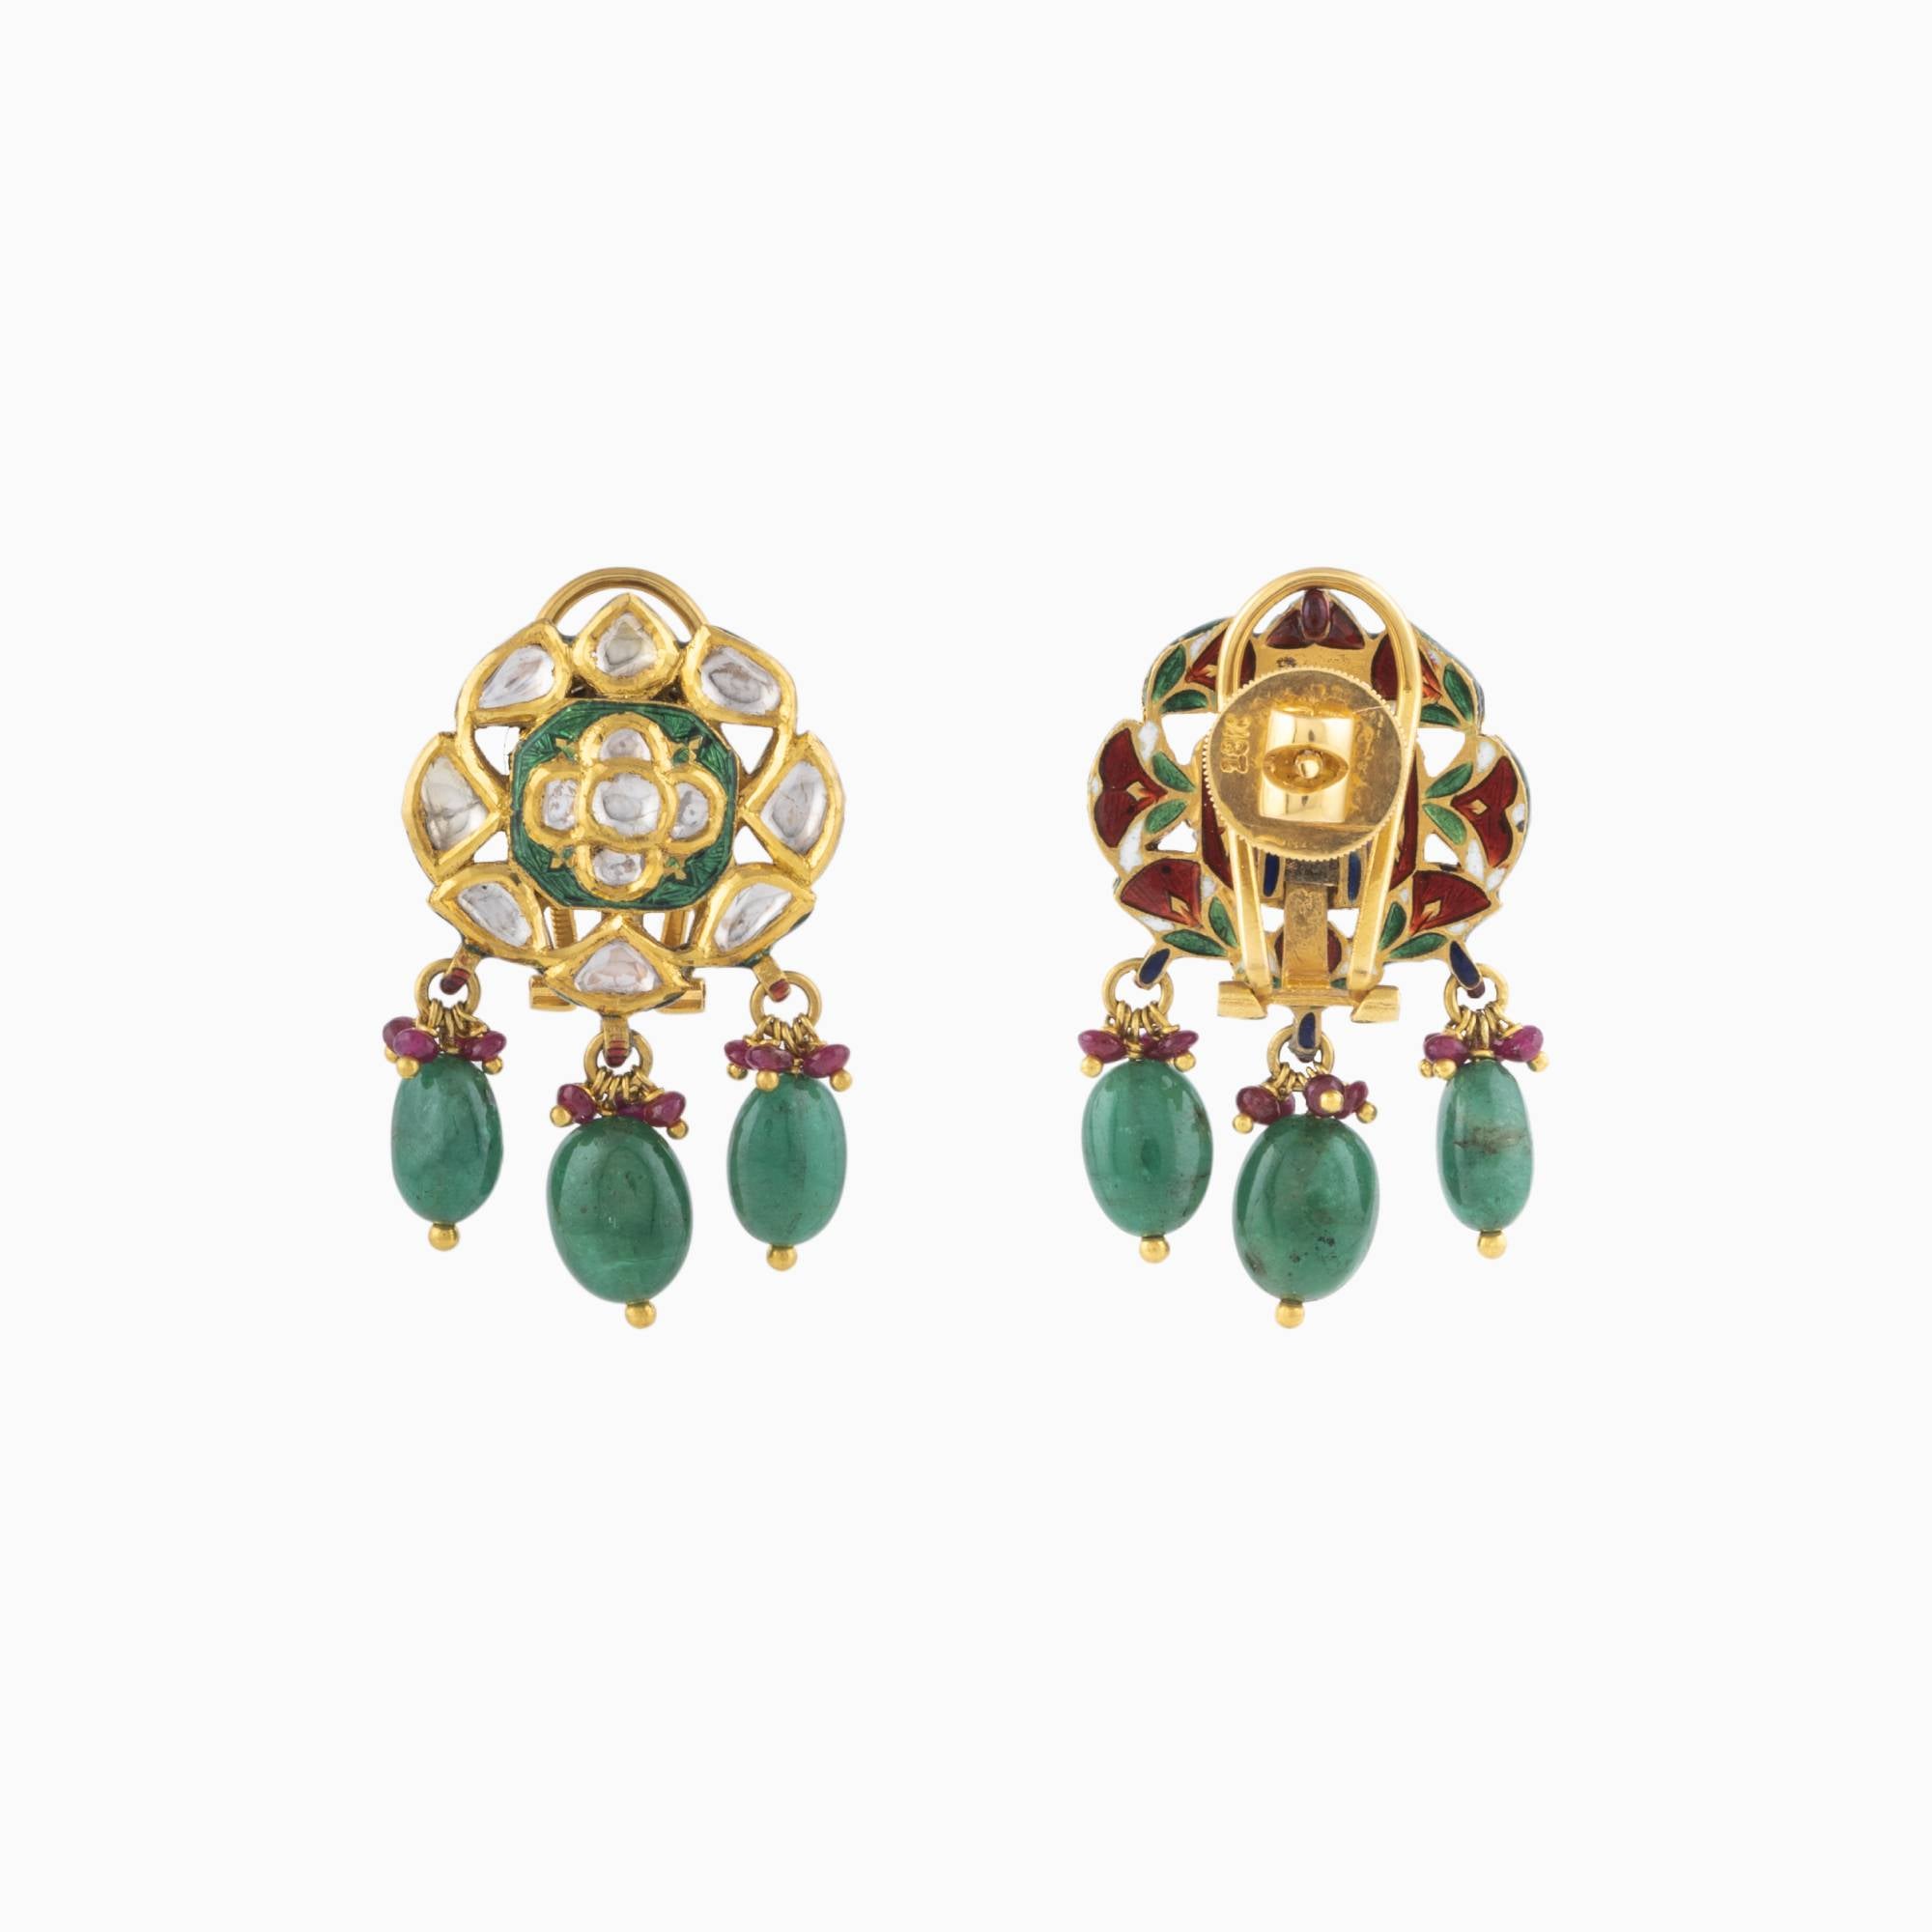 Earring Pair with Green Handwork Enamel Doposta, Uncut Diamond, Ruby Beads and Emerald Mani - KMPE0397